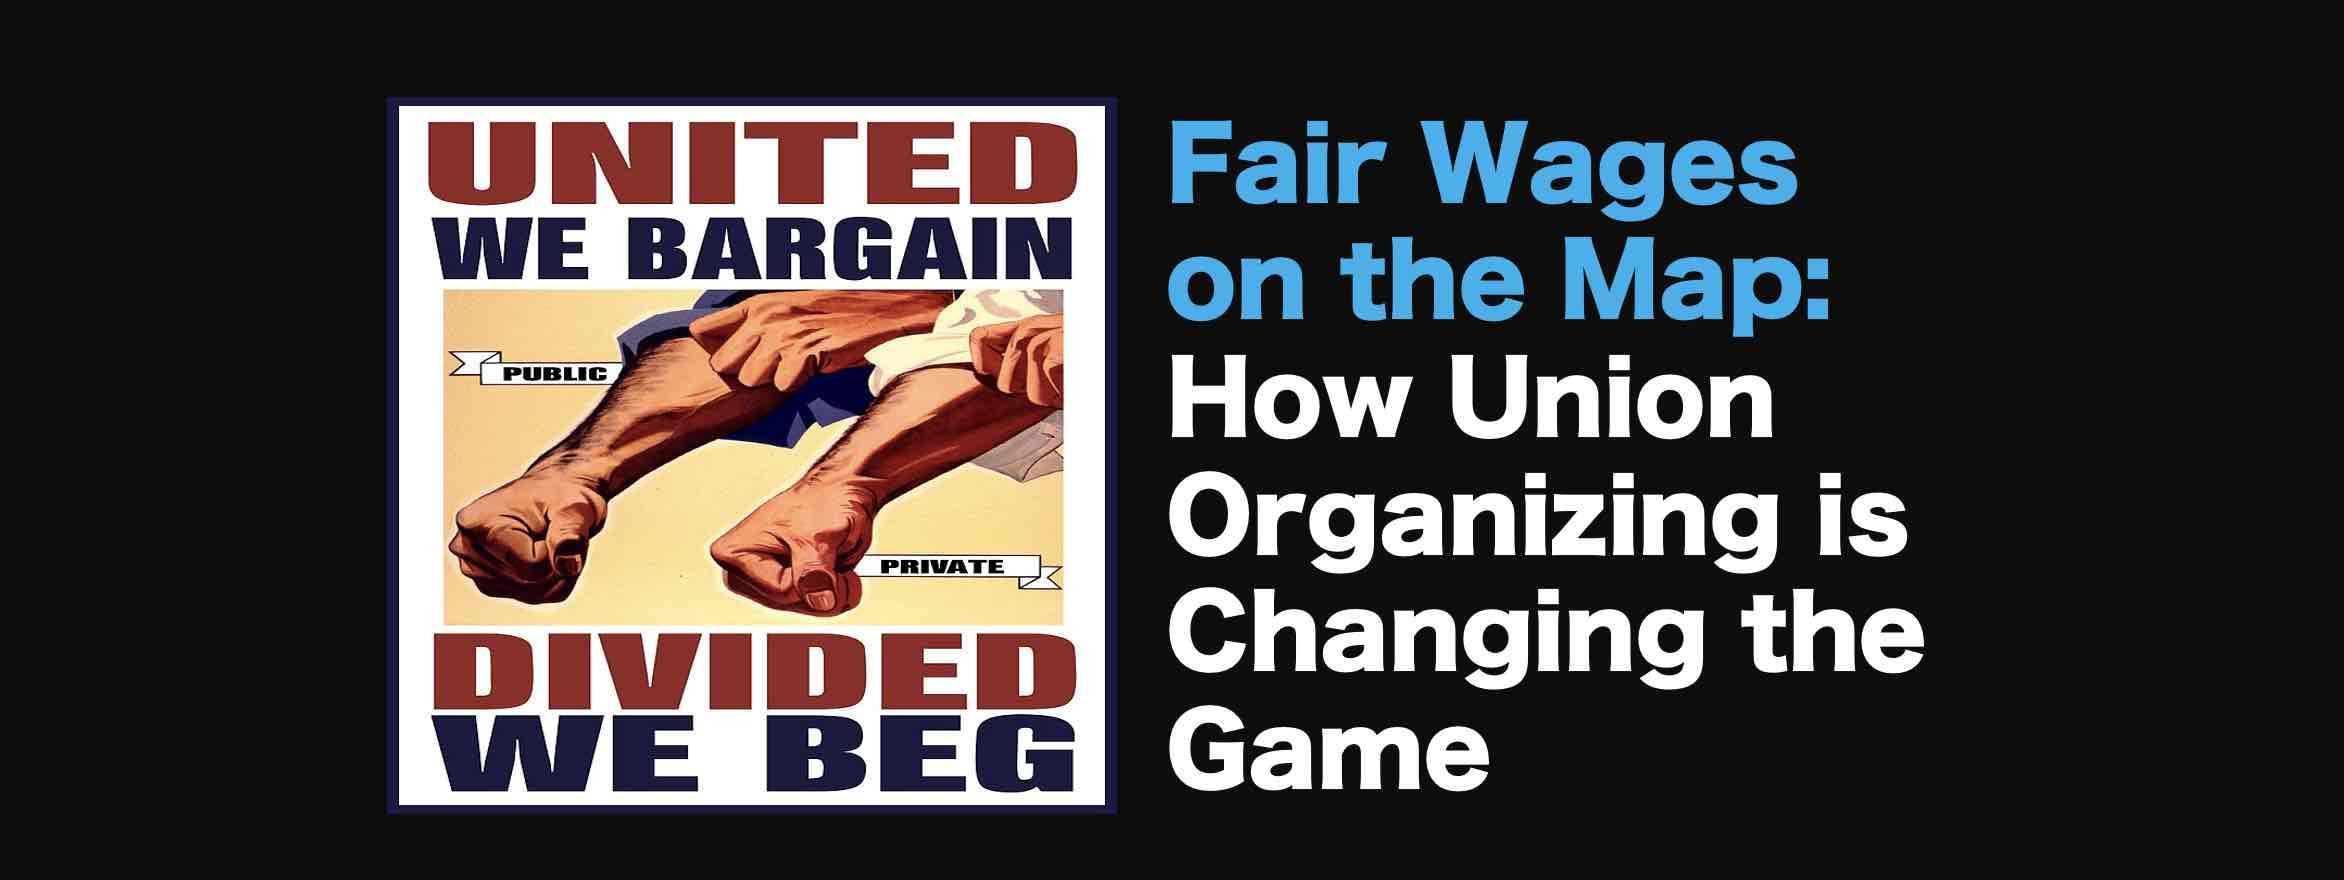 Fair Wages on the Map: How Union Organizing is Changing the Game